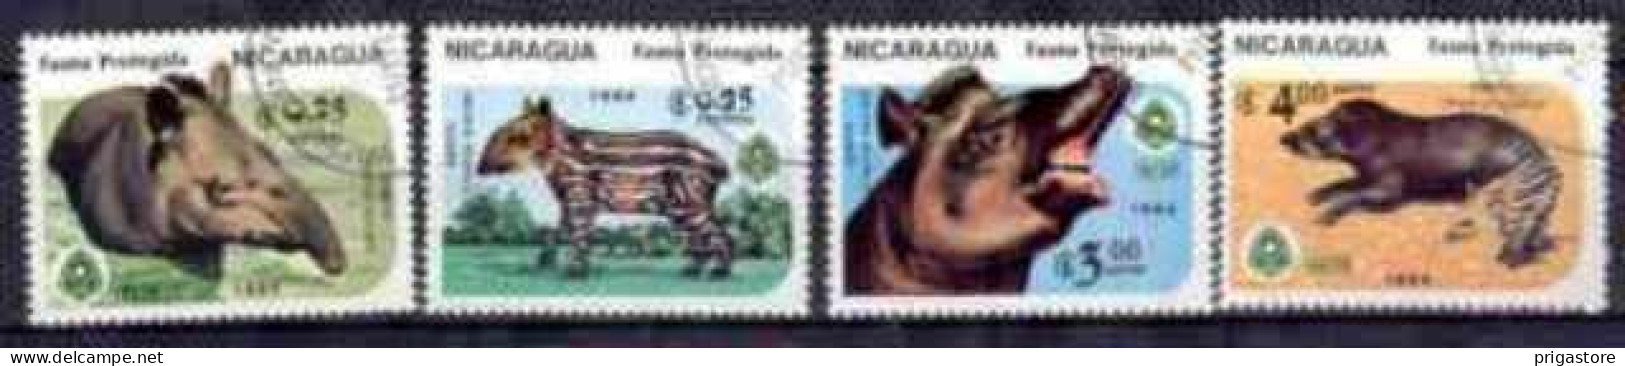 Nicaragua 1984 Animaux Tapirs (28) Yvert N° 1355+1356 Et PA 81+82 Oblitéré Used - Nicaragua